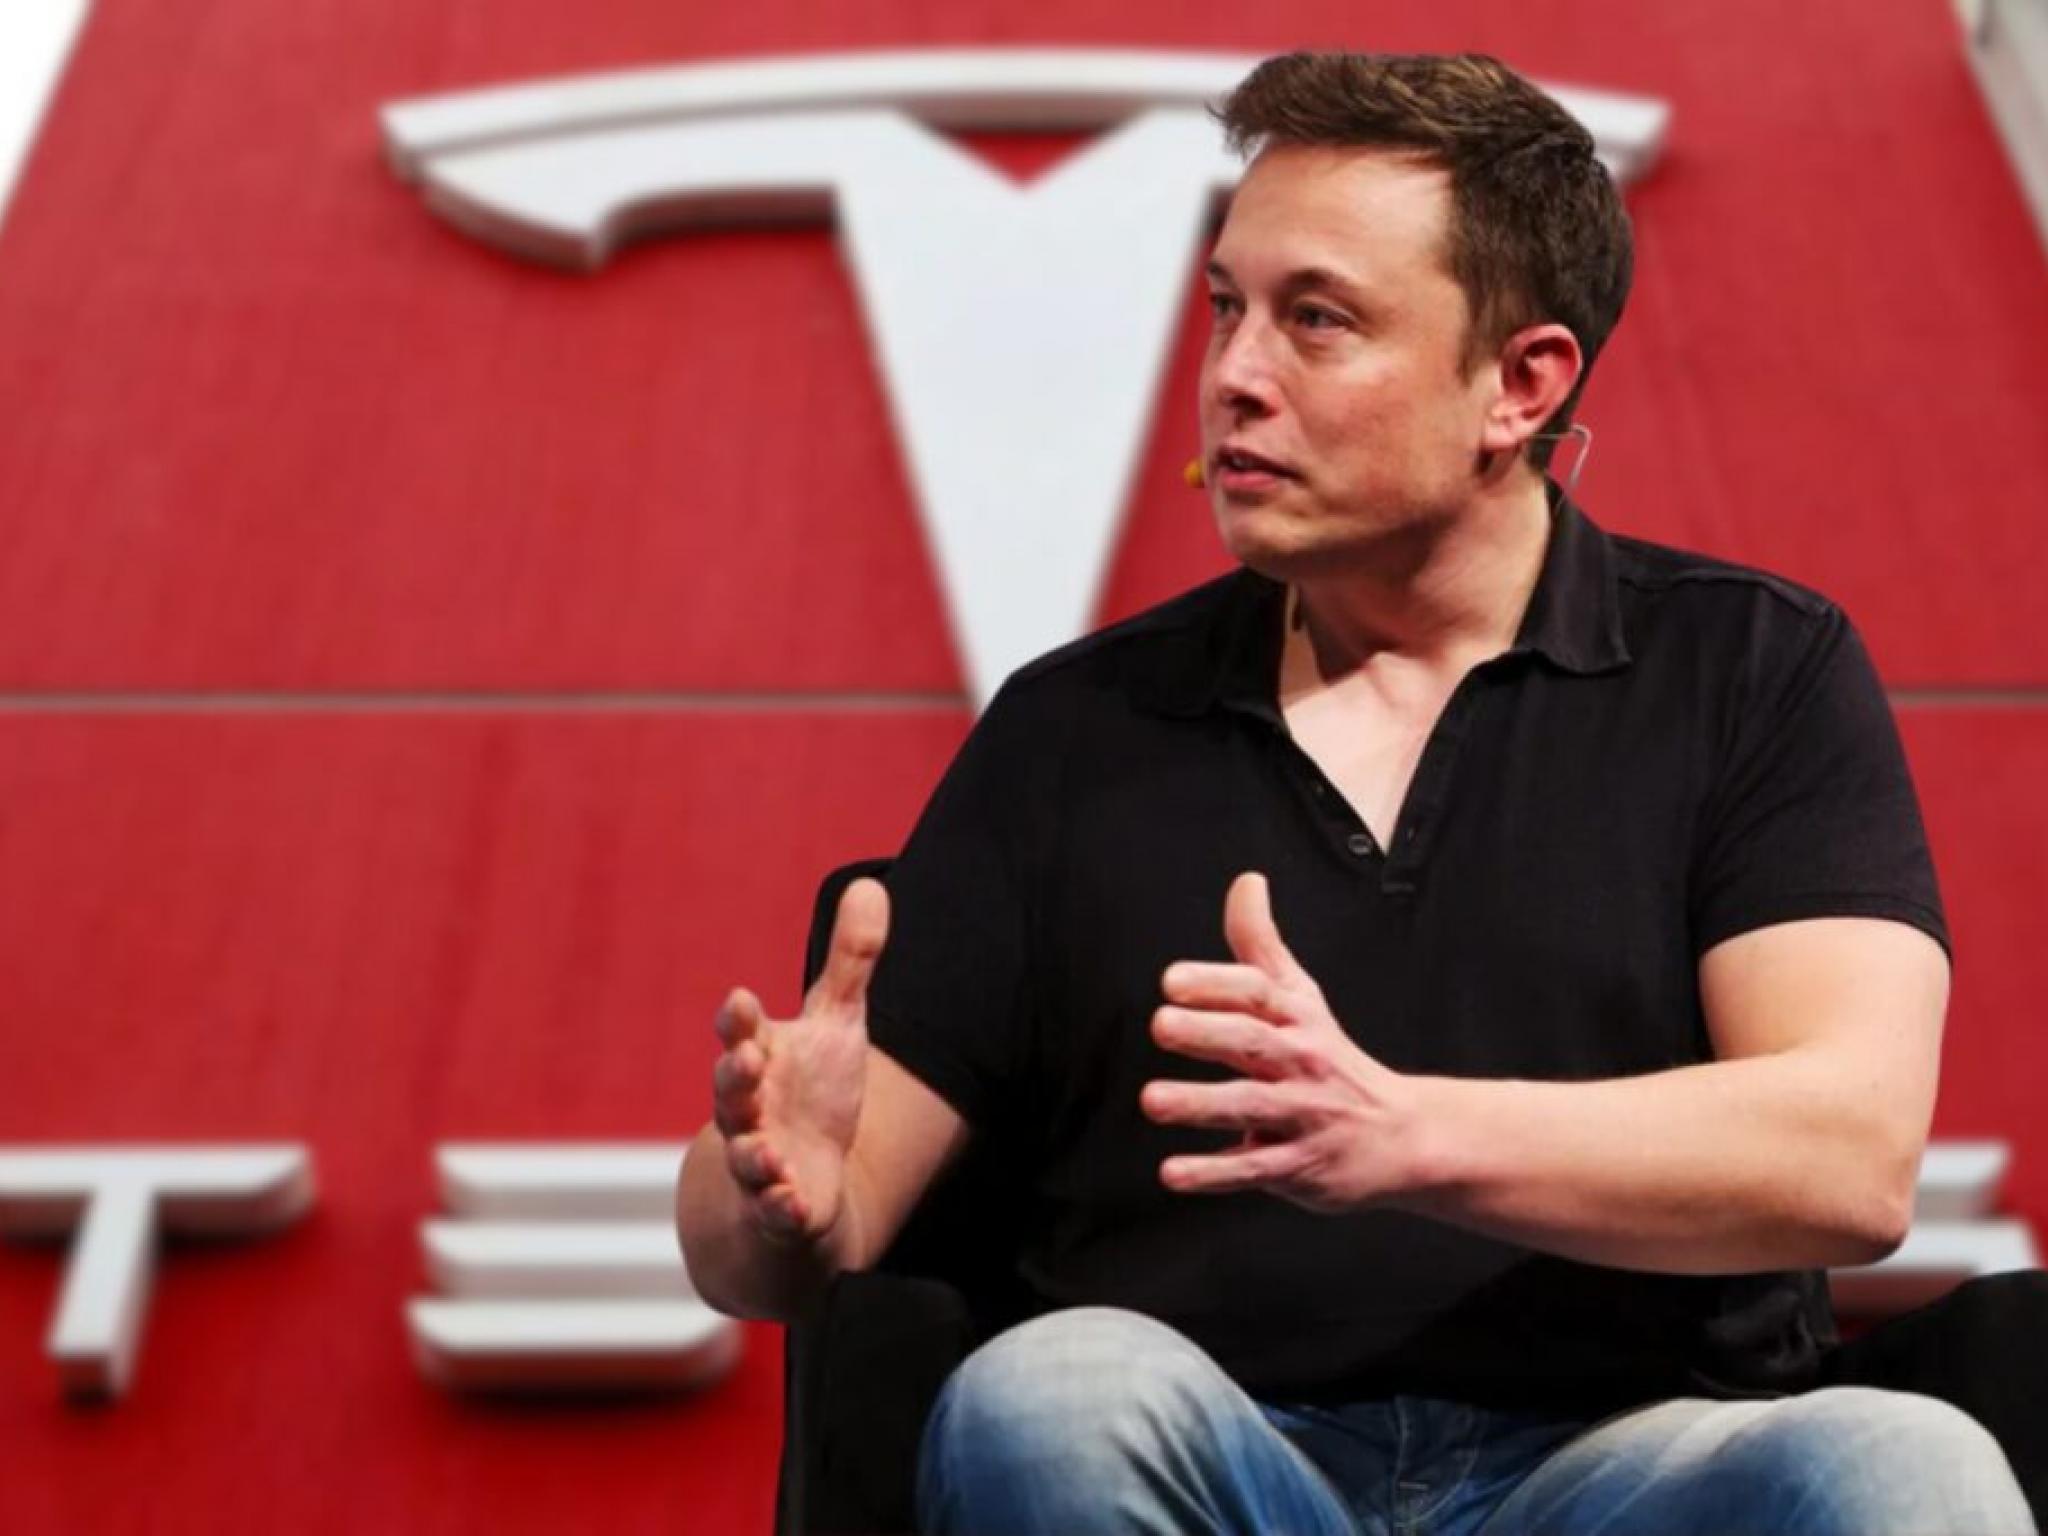  in-musk-we-trust-tesla-enthusiast-says-ev-giants-market-cap-would-be-way-lower-with-a-vanilla-play-it-safe-dont-rock-the-boat-ceo 